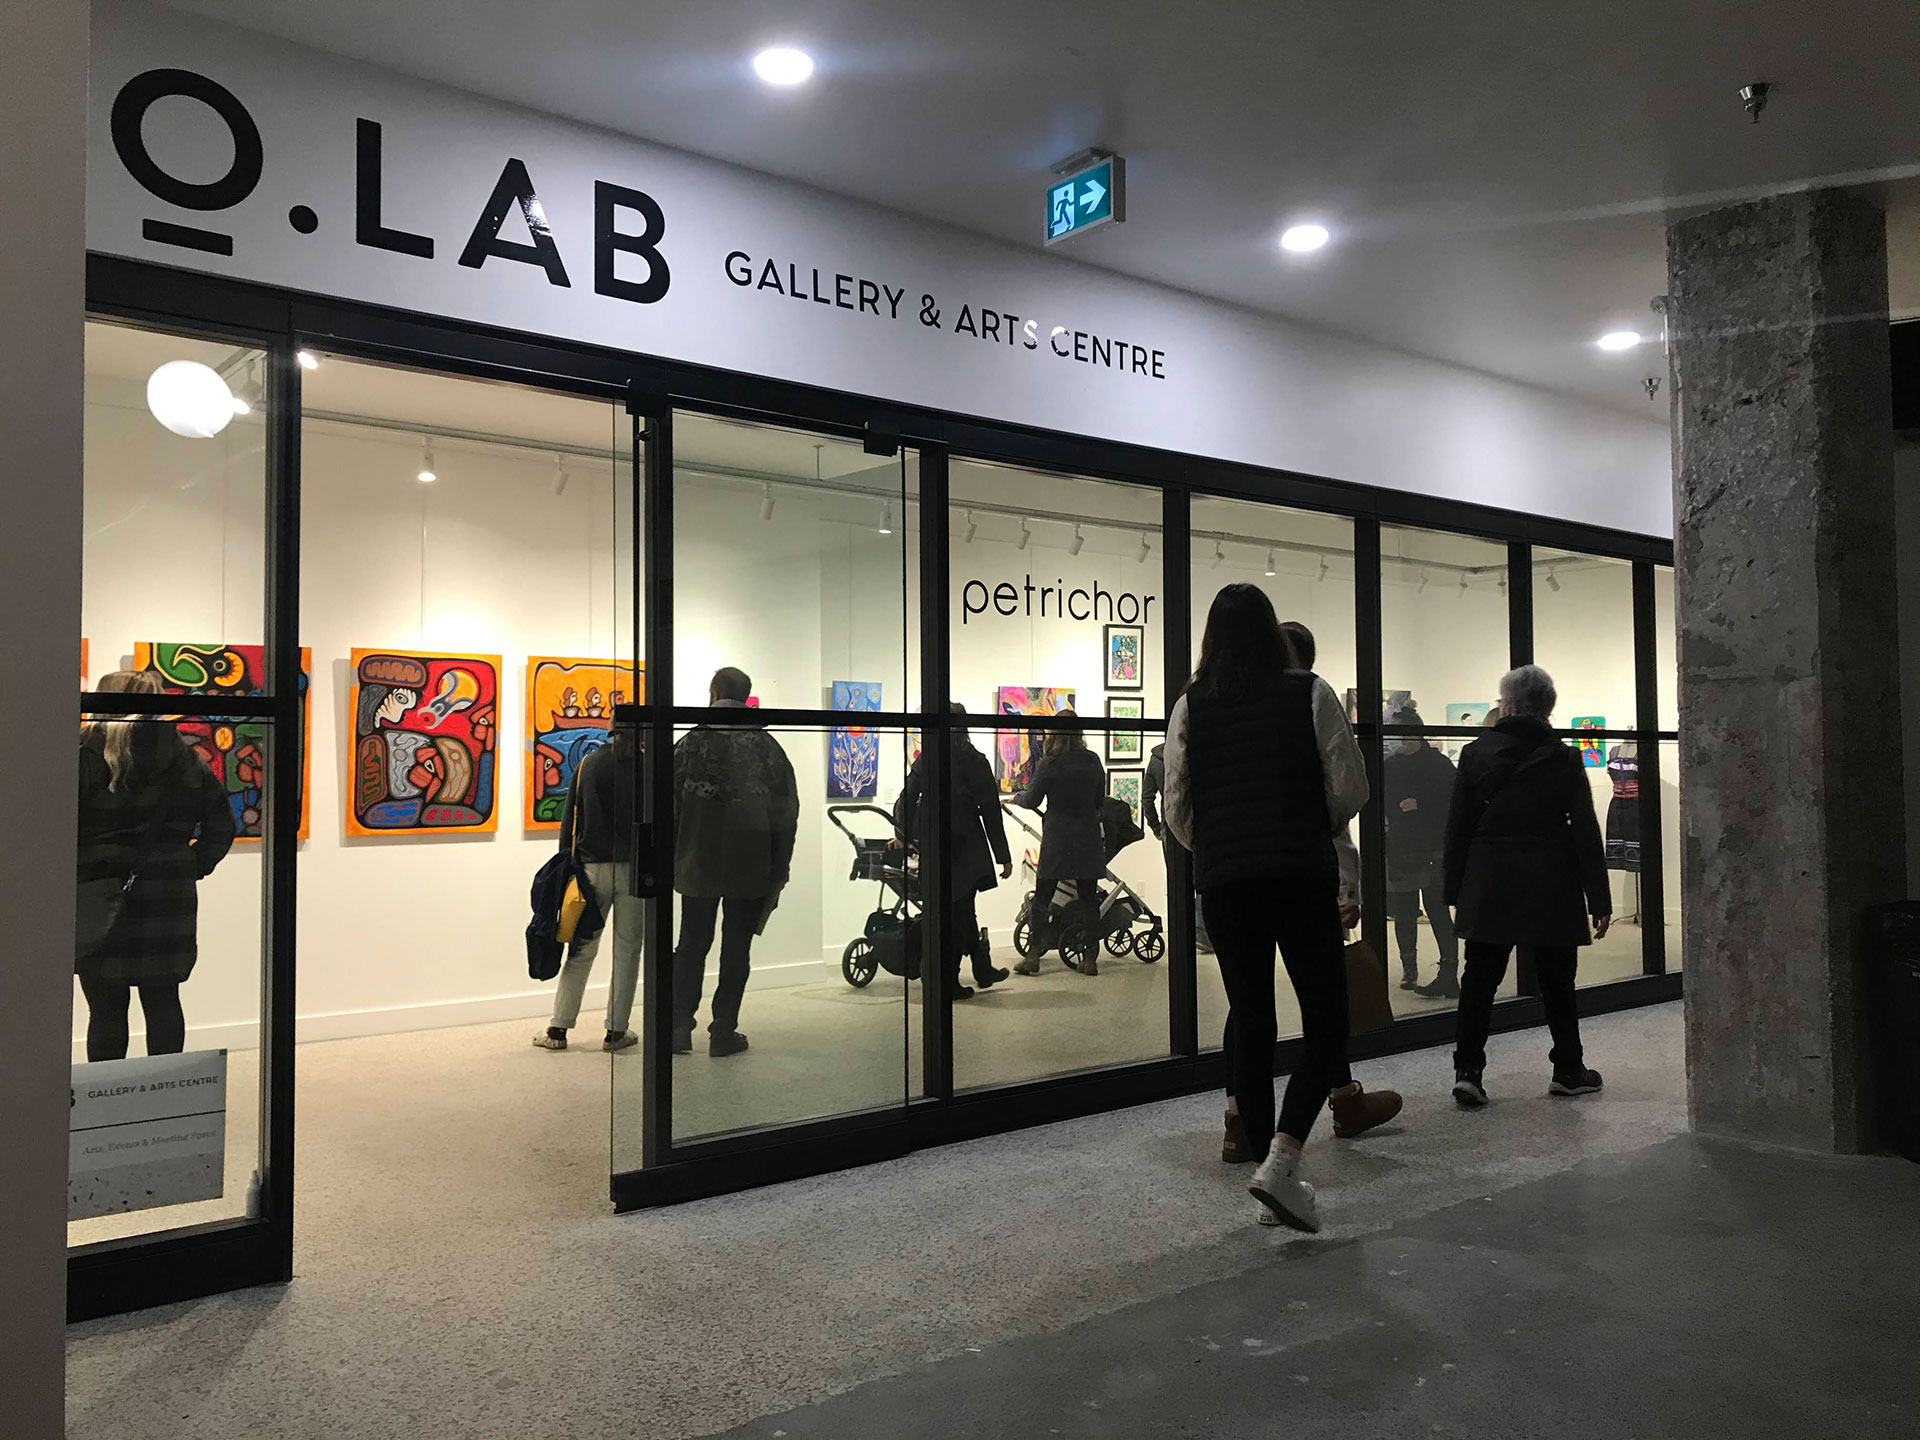 Co.Lab Gallery